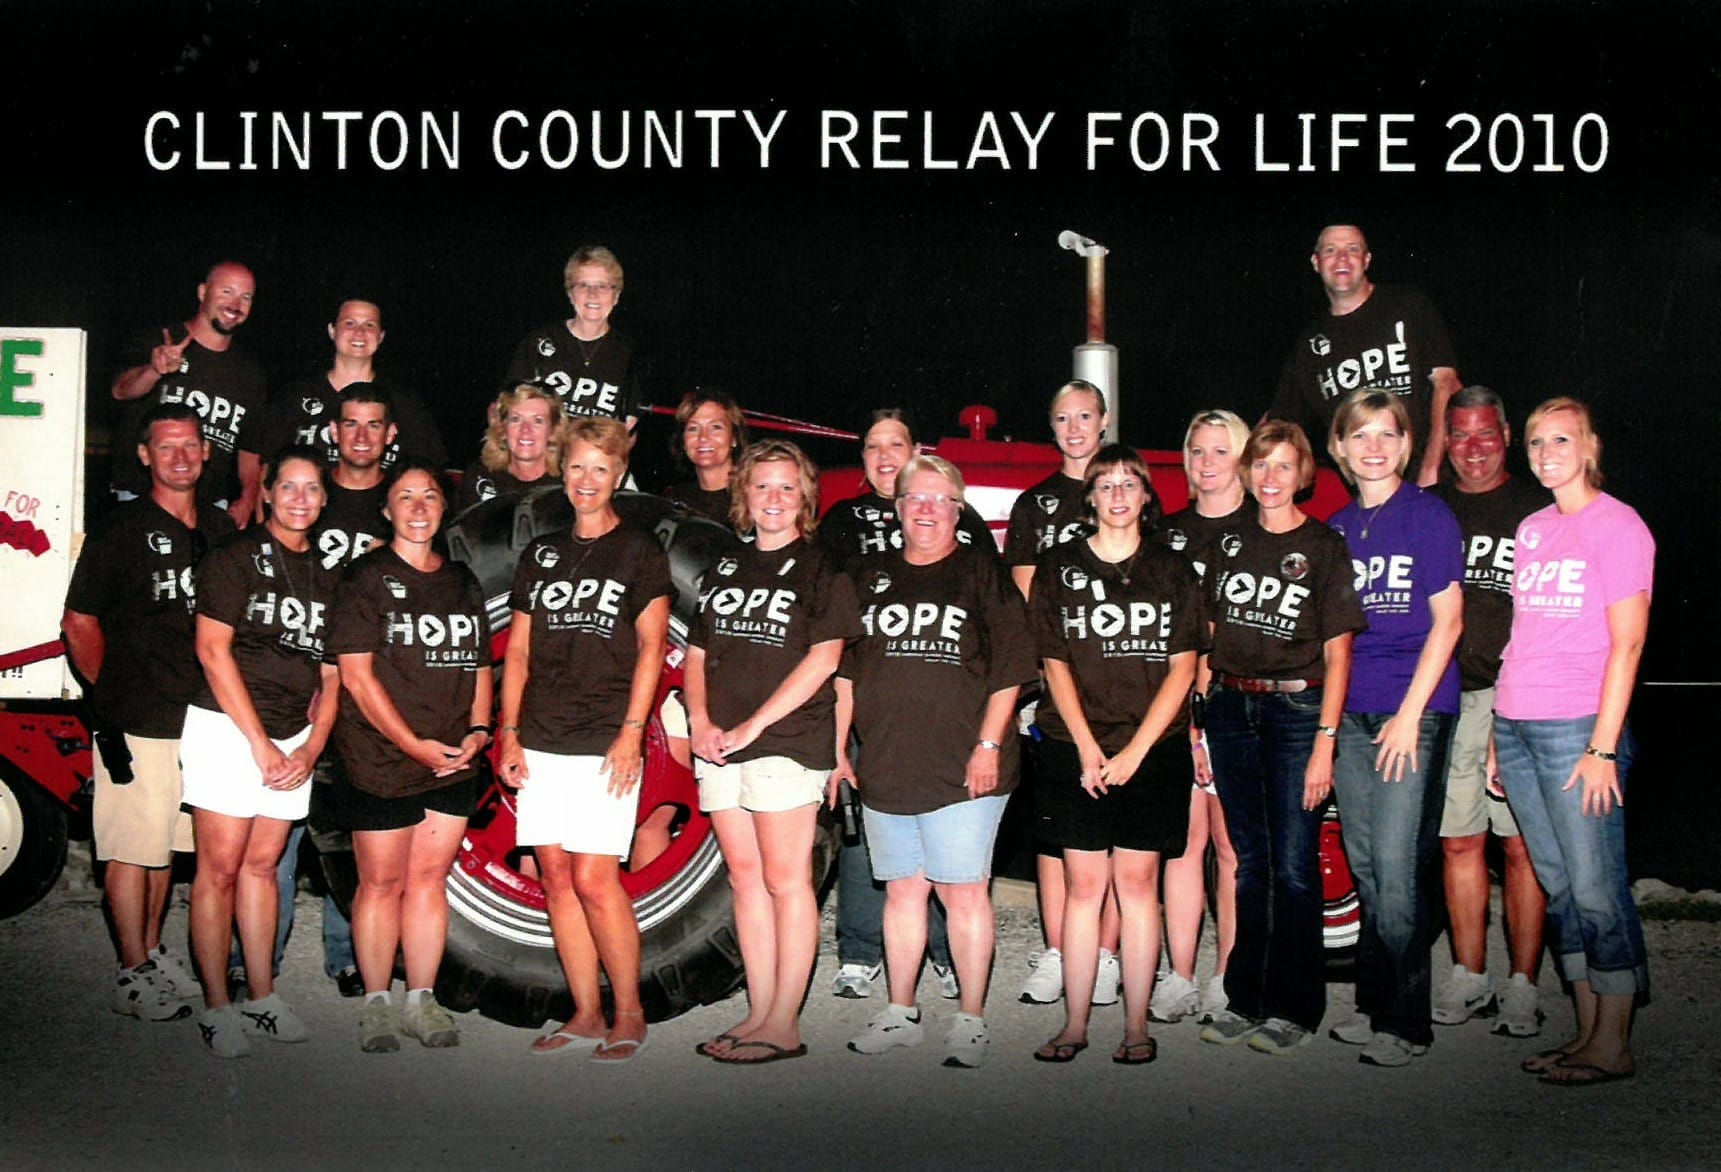 Group photo of Clinton County Relay For Life team.